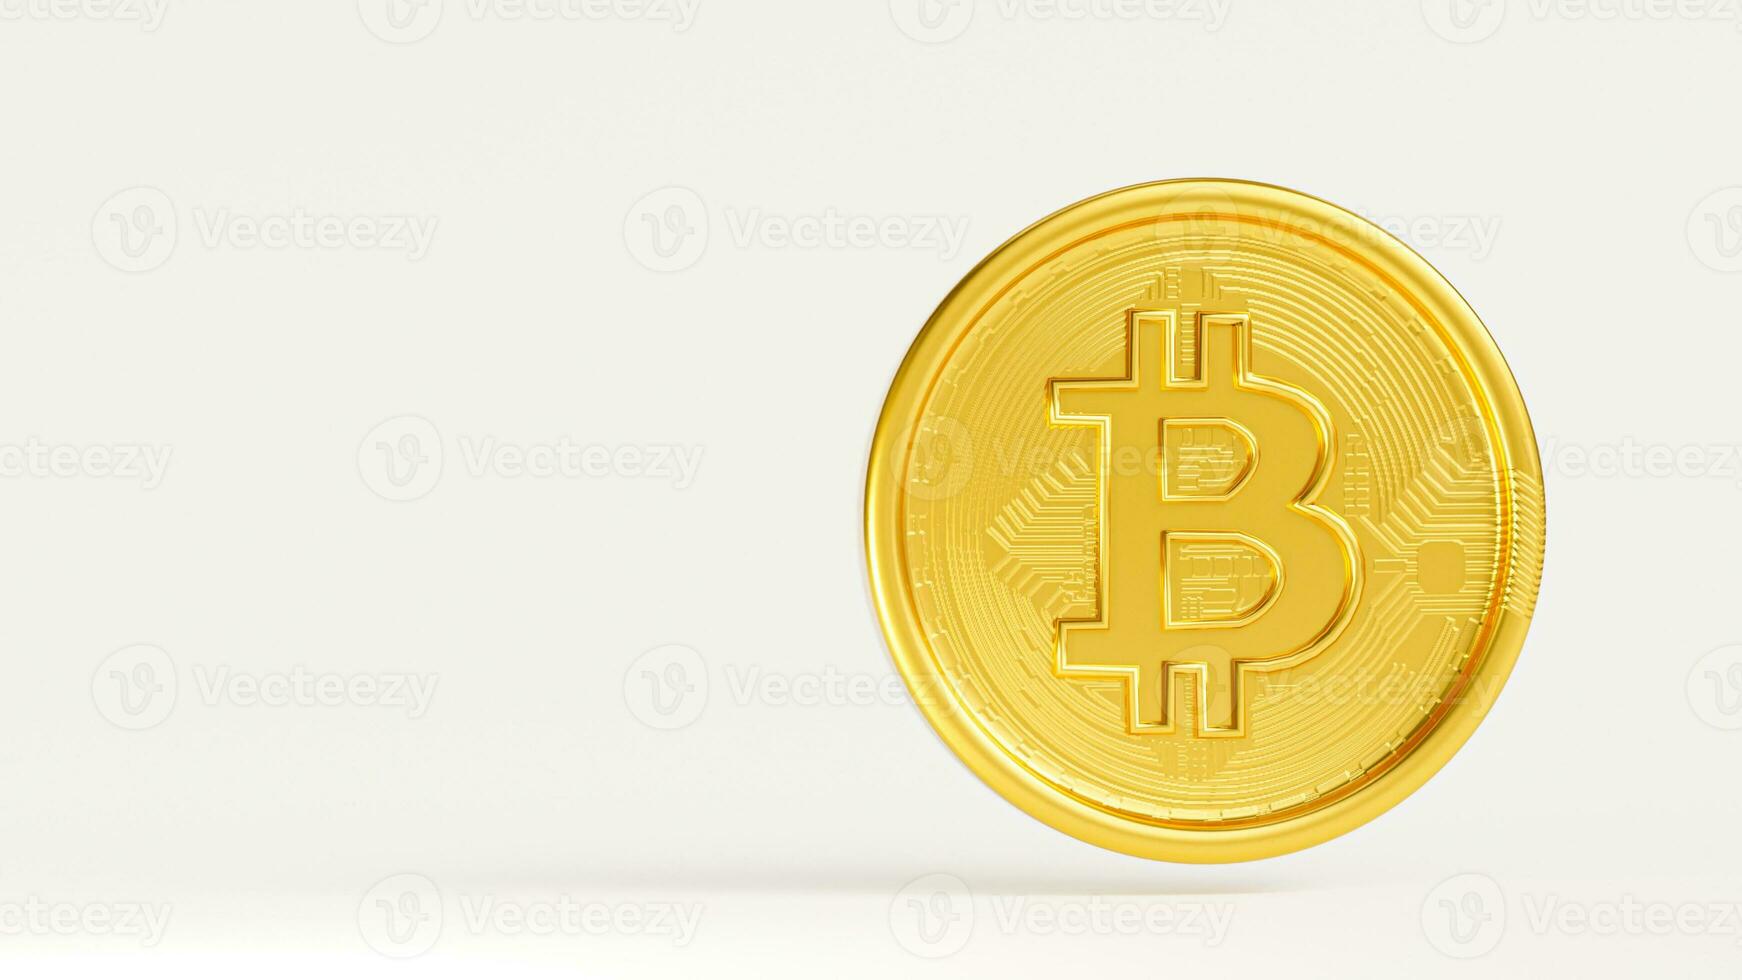 3d rendering of bitcoins isolated on white background photo